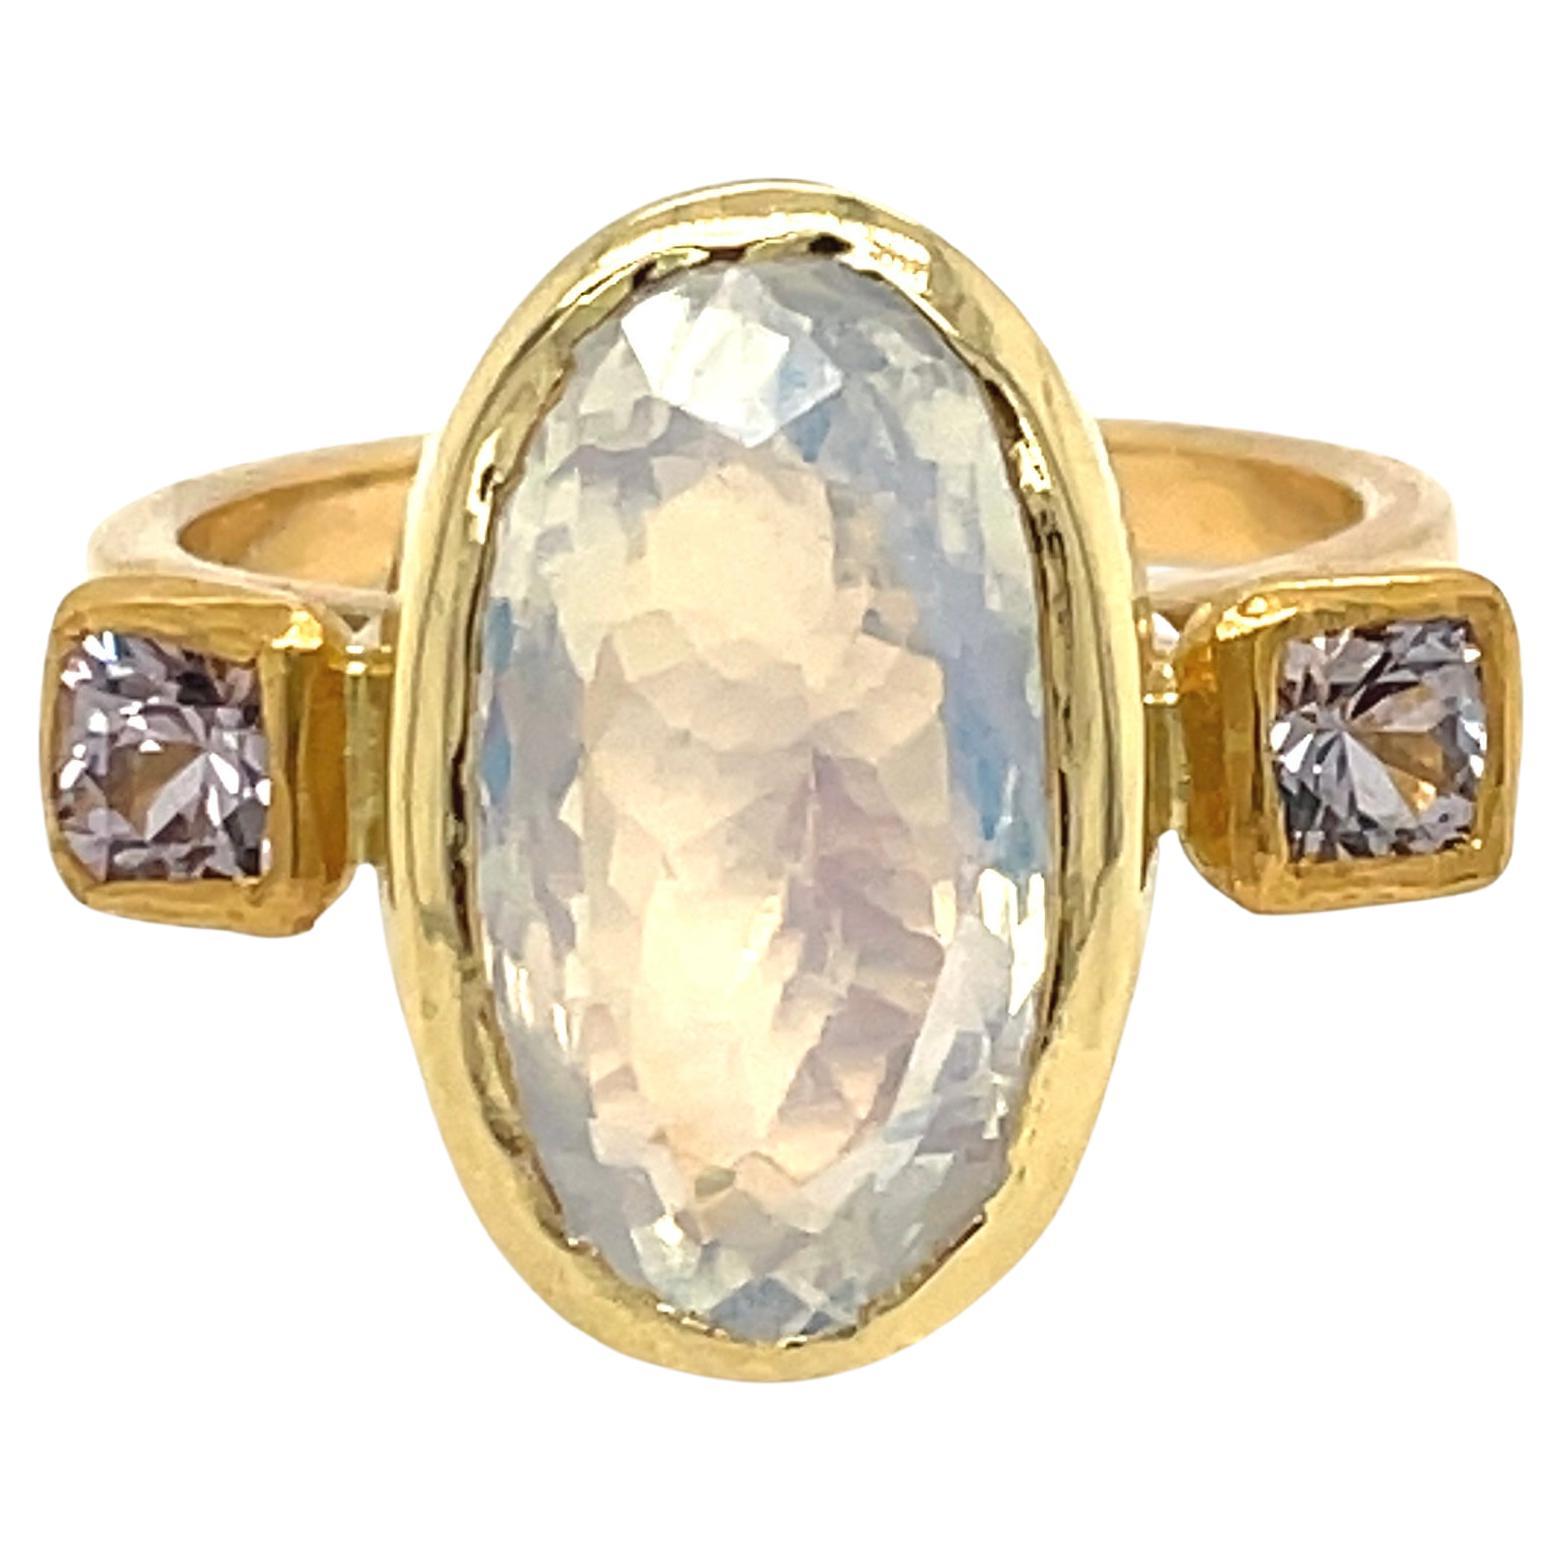 KD for J Weir Gems 7 Carat Rainbow Moonstone Spinel Gold Ring